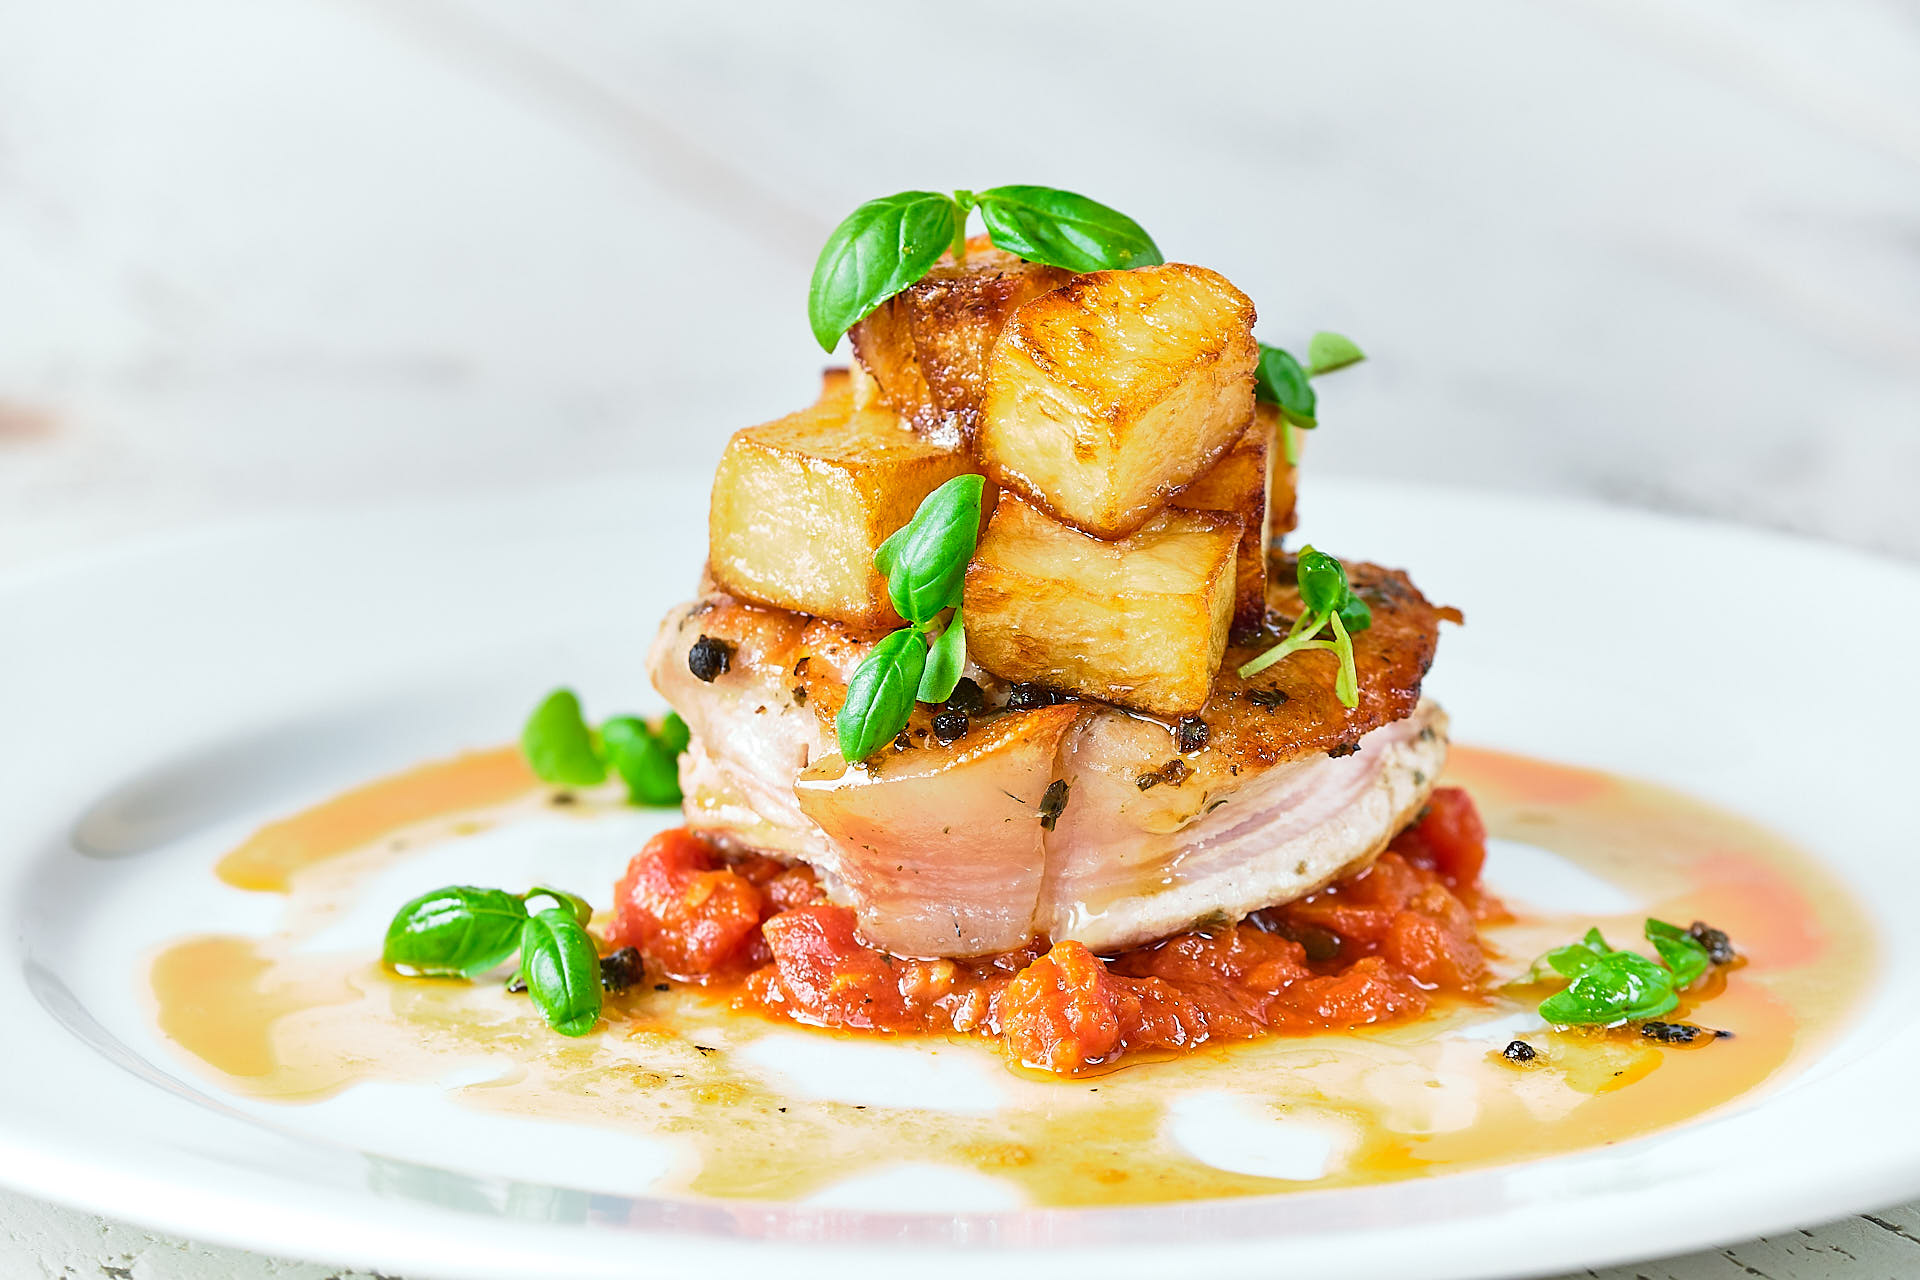 A tender slice of pork is served with roasted potatoes, a rich sauce and basil leaves.